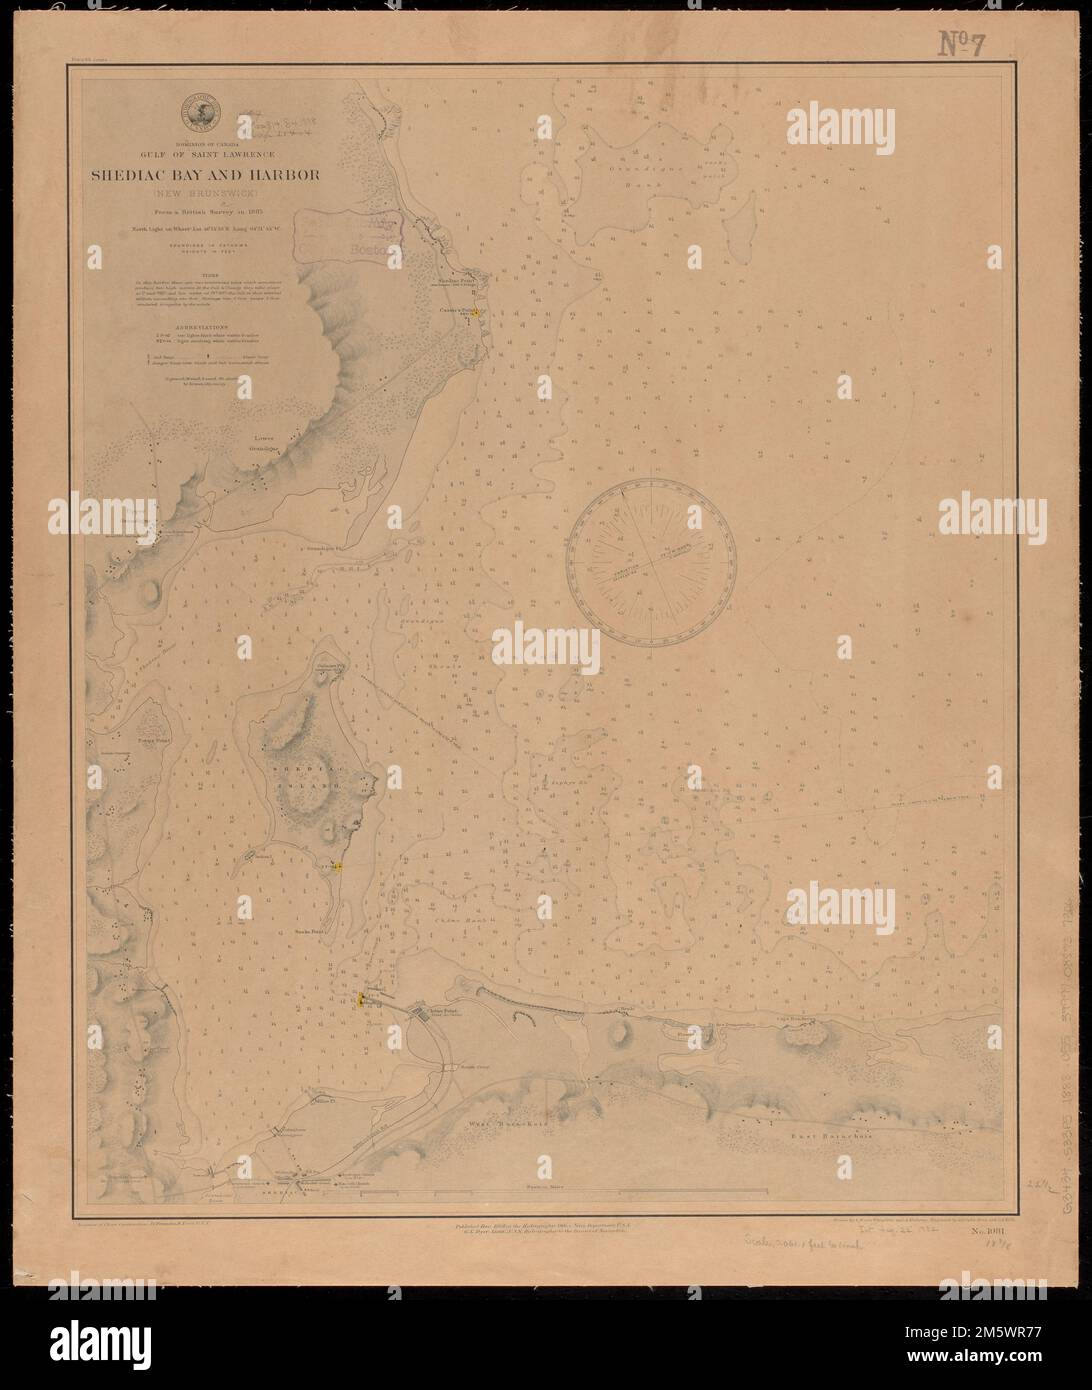 Dominion of Canada, Gulf of Saint Lawrence, Shediac Bay and Harbor (New Brunswick) : from a British survey in 1885. Relief shown by hachures and spot heights. Depths shown by soundings and form lines... Shediac Bay and Harbor (New Brunswick). Shediac Bay and Harbor (New Brunswick), Canada  , Province of New Brunswick  ,province   , Shediac Stock Photo